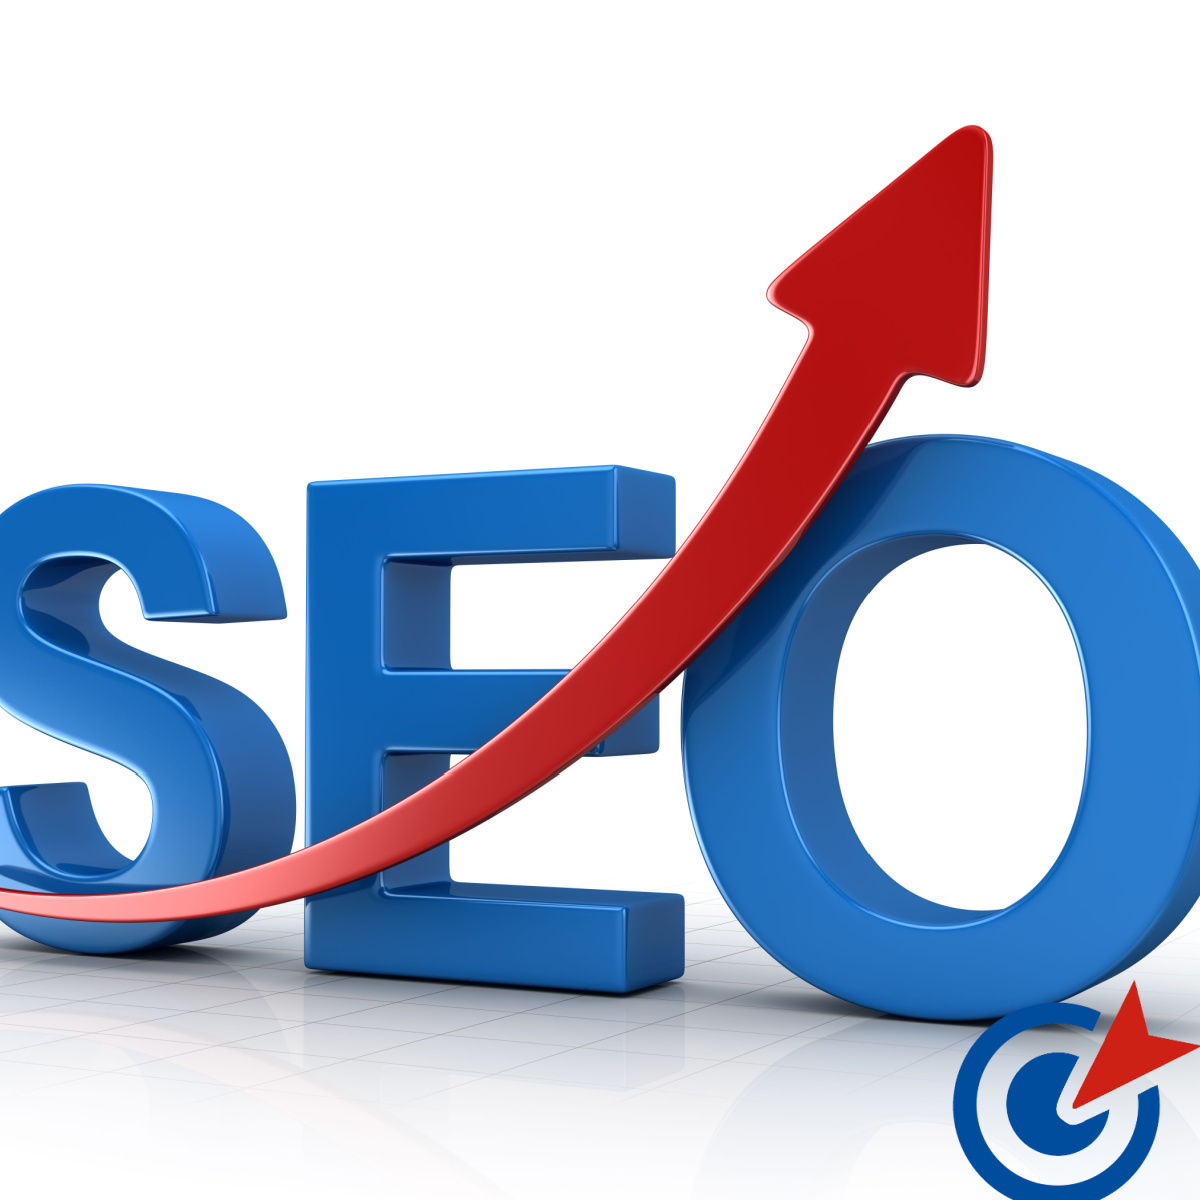 Search Engine Optimization Basics All Business Owners Should Know